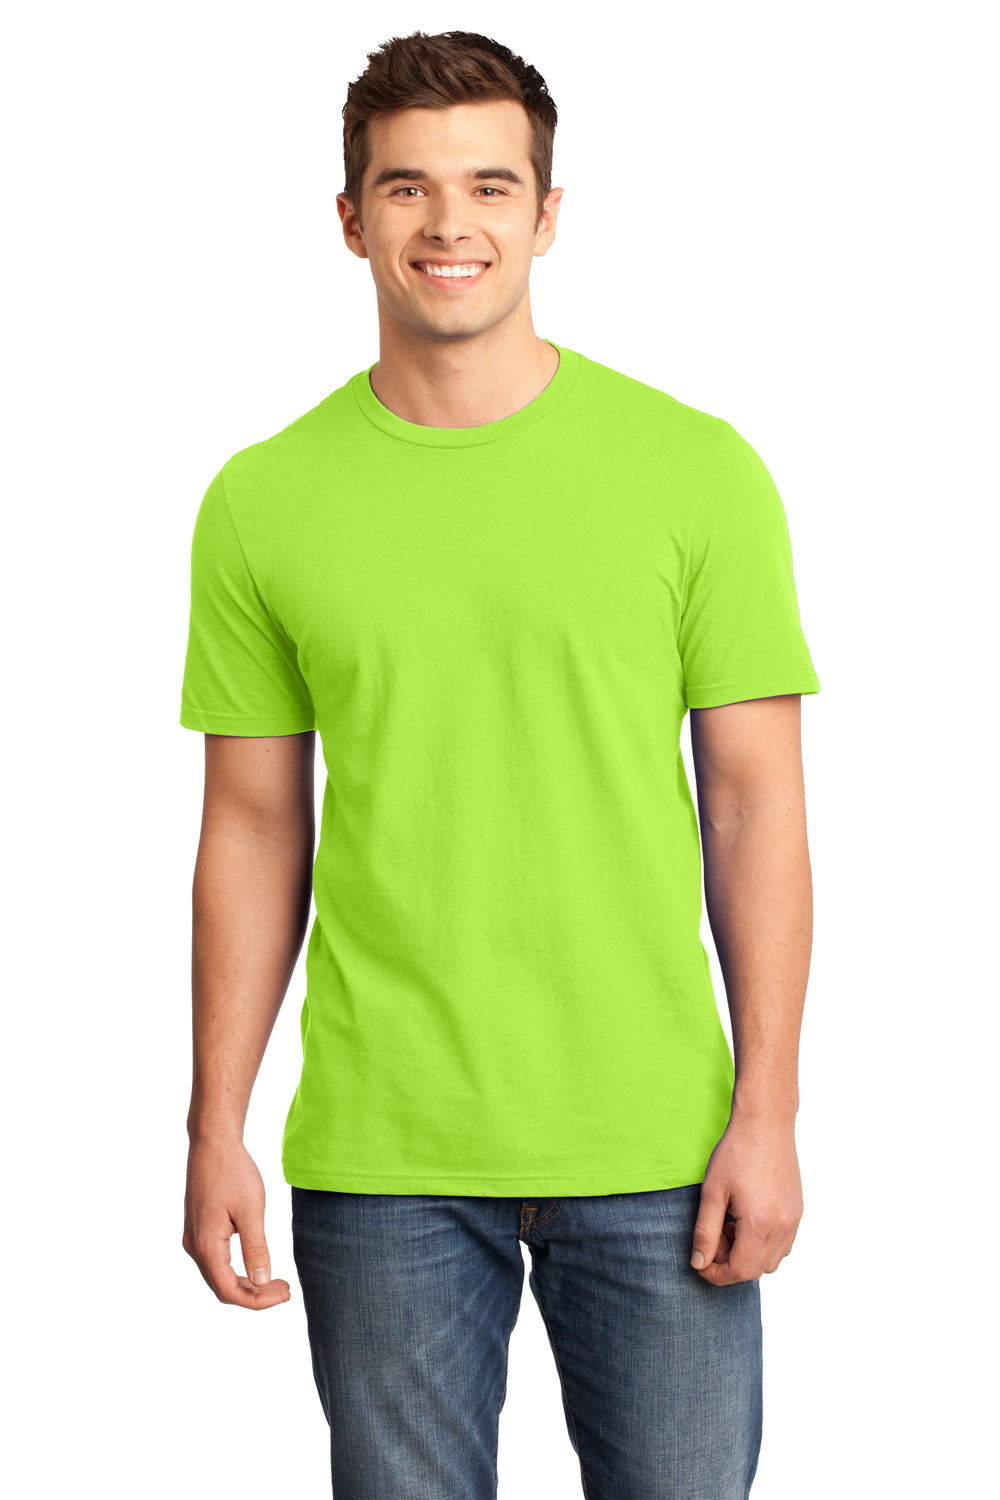 District DT6000 Mens Very Important Short Sleeve Crewneck T-Shirt Lime Green Front